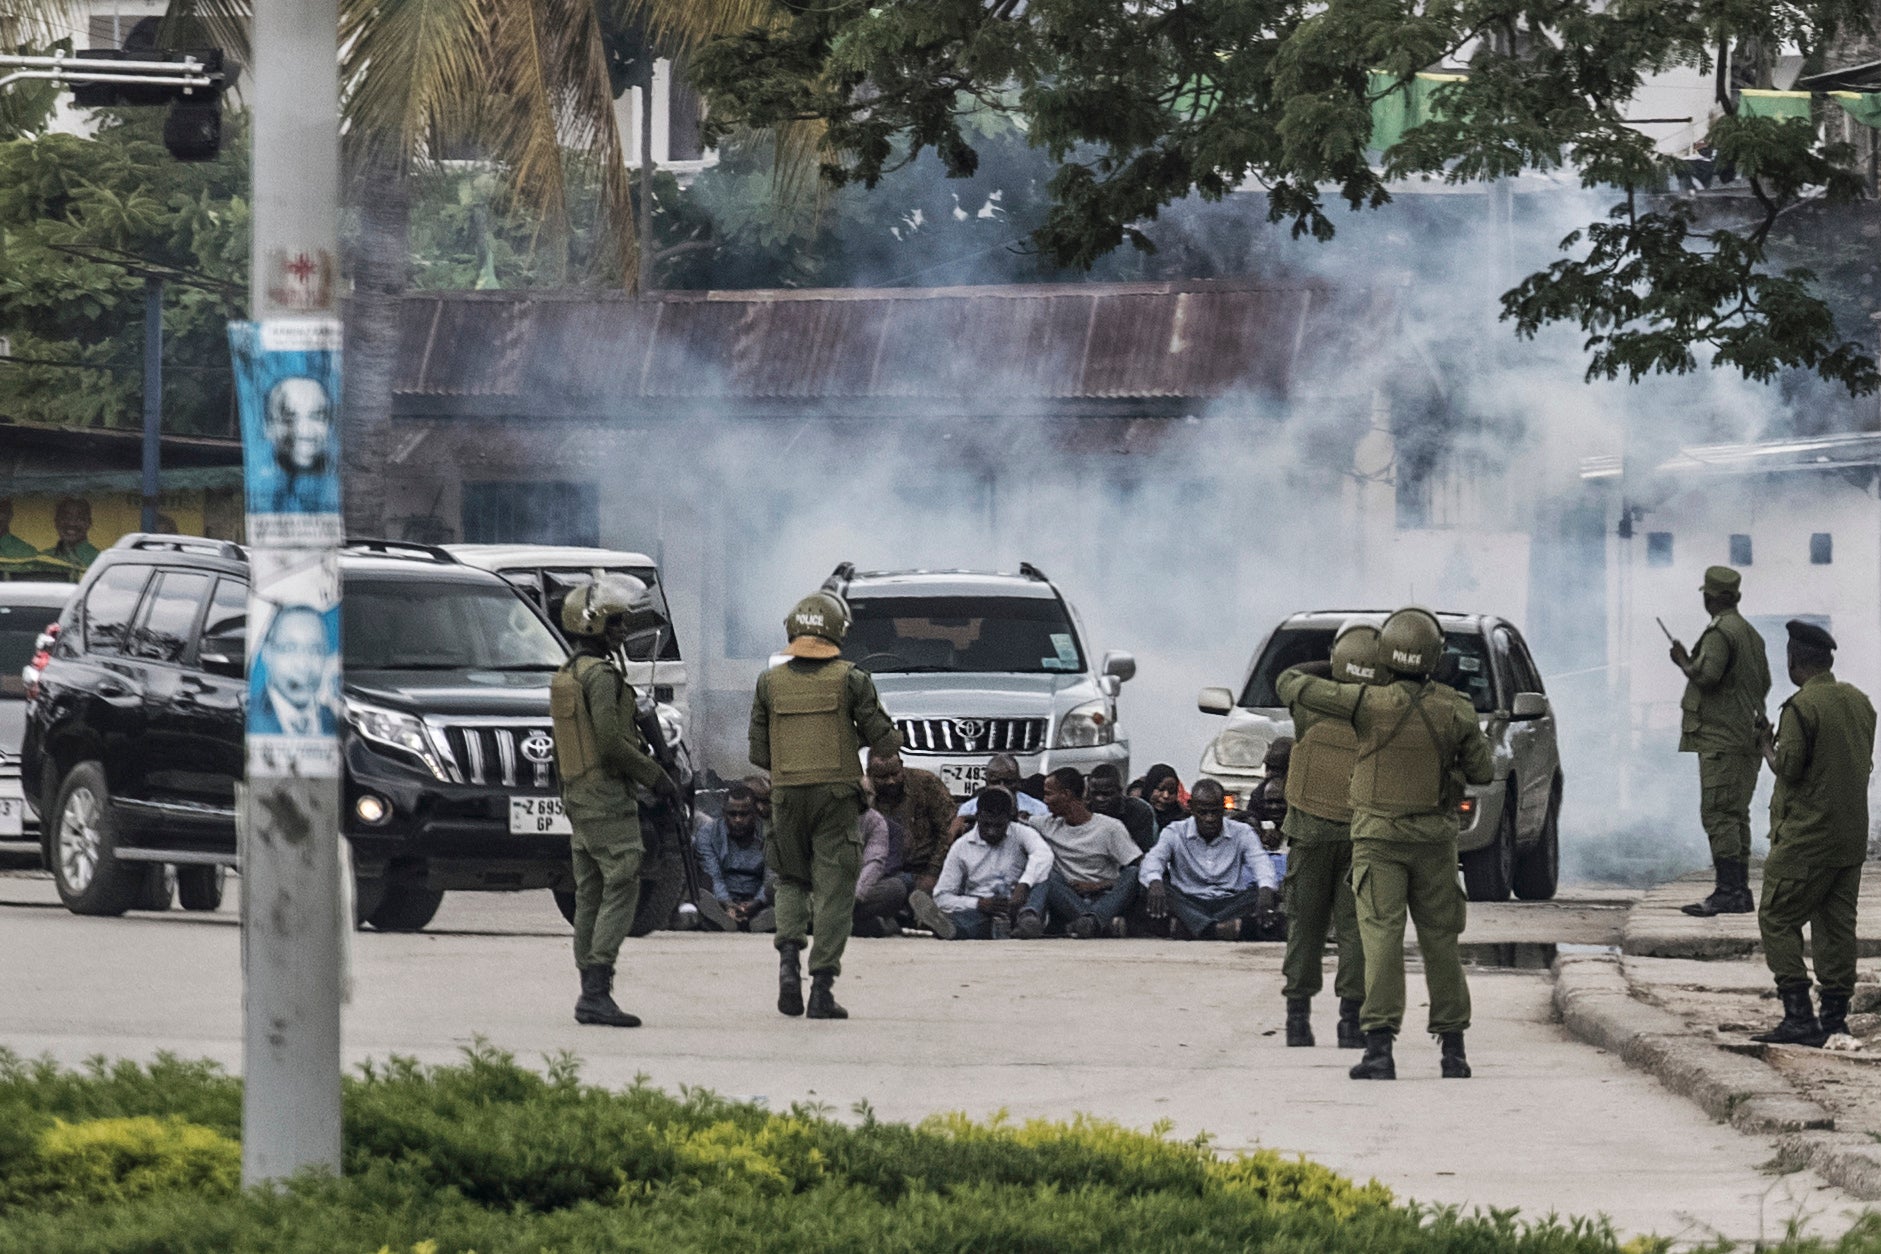 Zanzibar's anti-riot police officers stand guard by a group of men sitting on the ground during an operation after the opposition called for protests in Stone Town, on October 29, 2020 as tensions rise while the results of the general election are being announced.